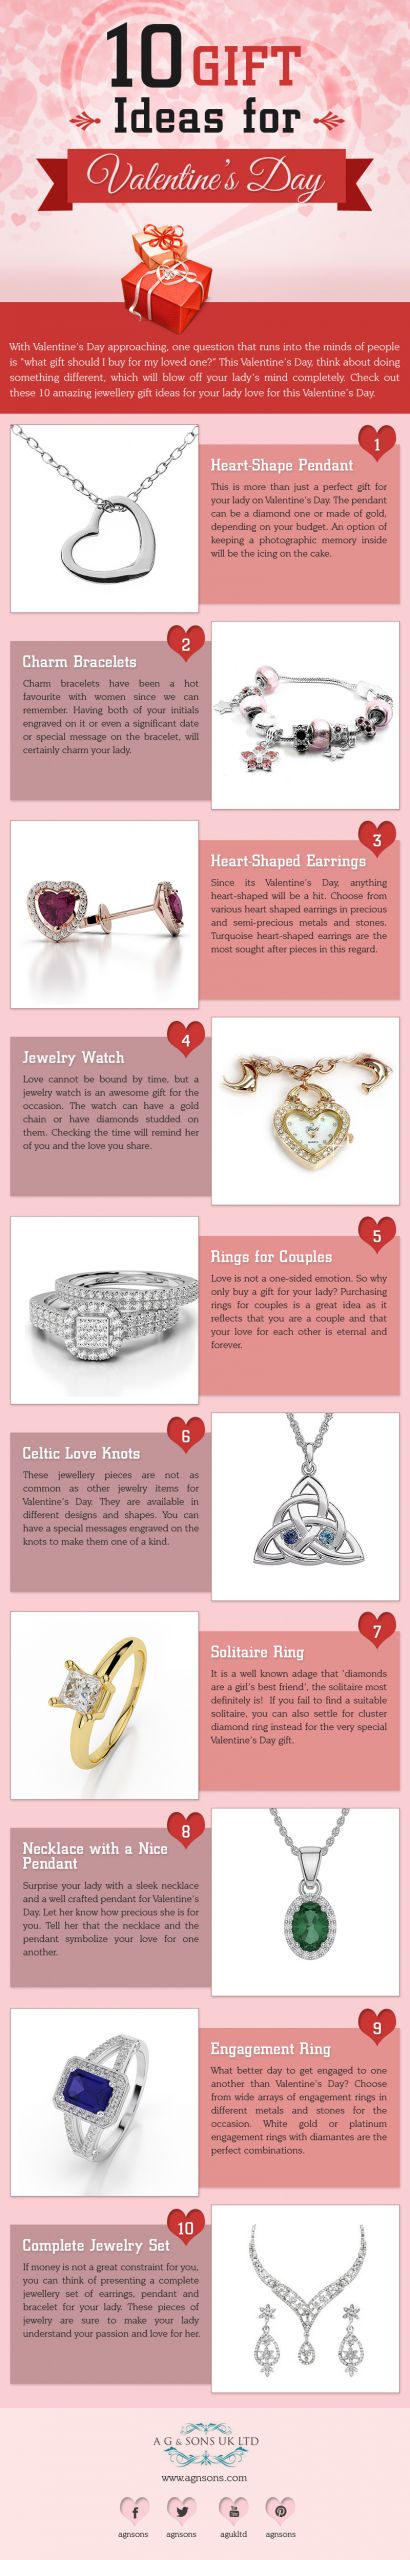 Best Valentine Gift Ideas For Her
 Top 10 Valentine’s Day Gift Ideas for Her [Infographic